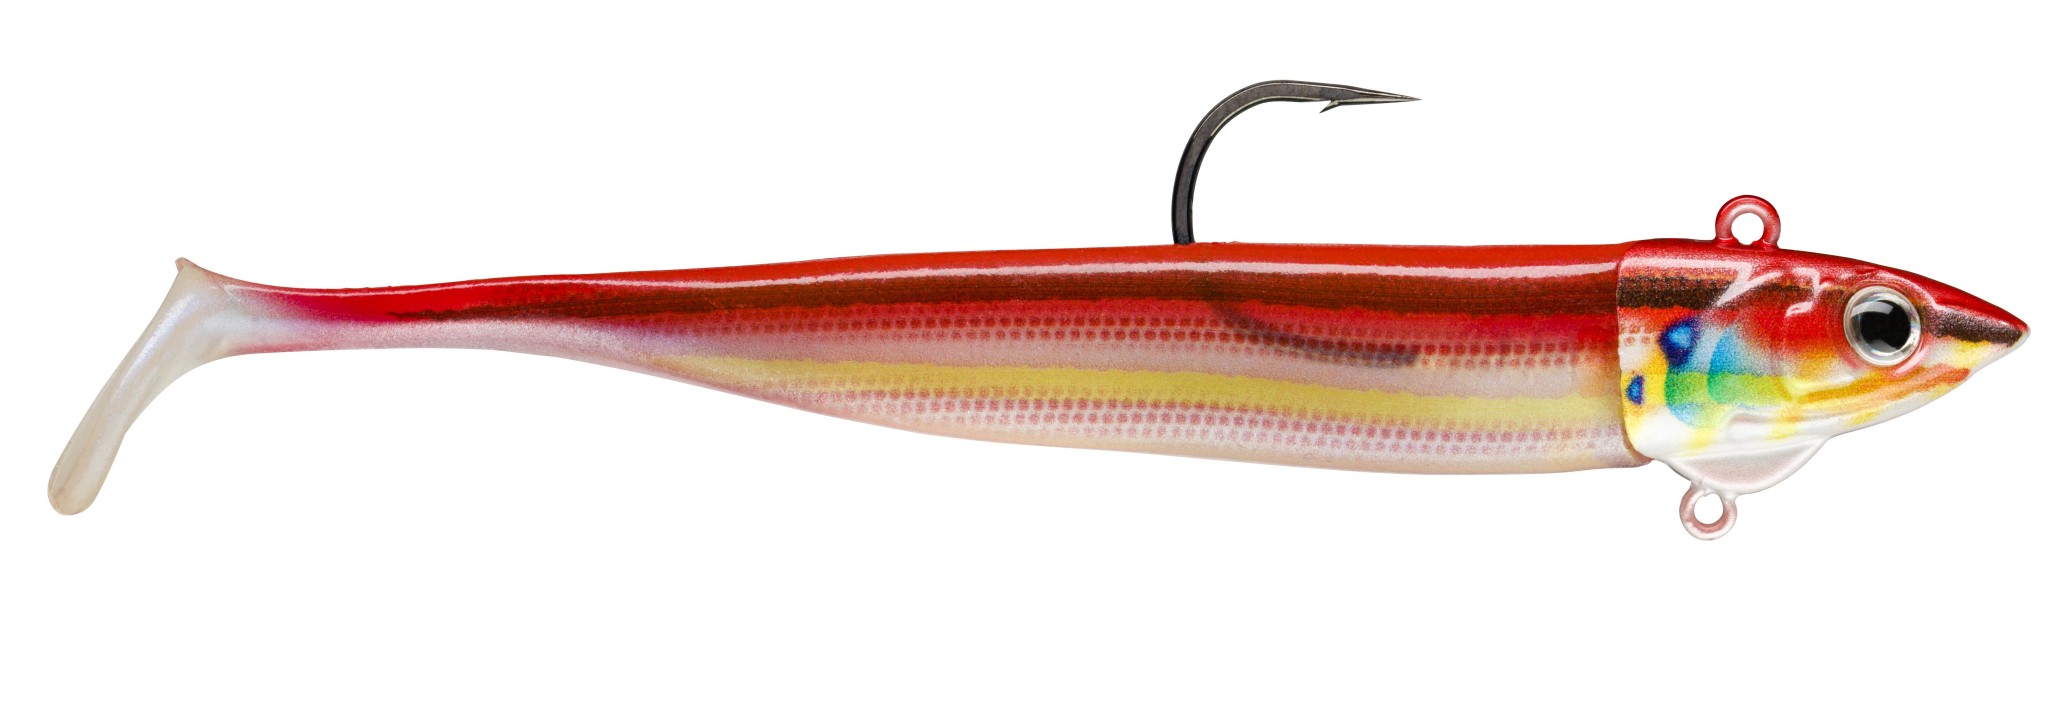 Storm 360GT Coastal Biscay Minnow Mounted Lures 2pc – Glasgow